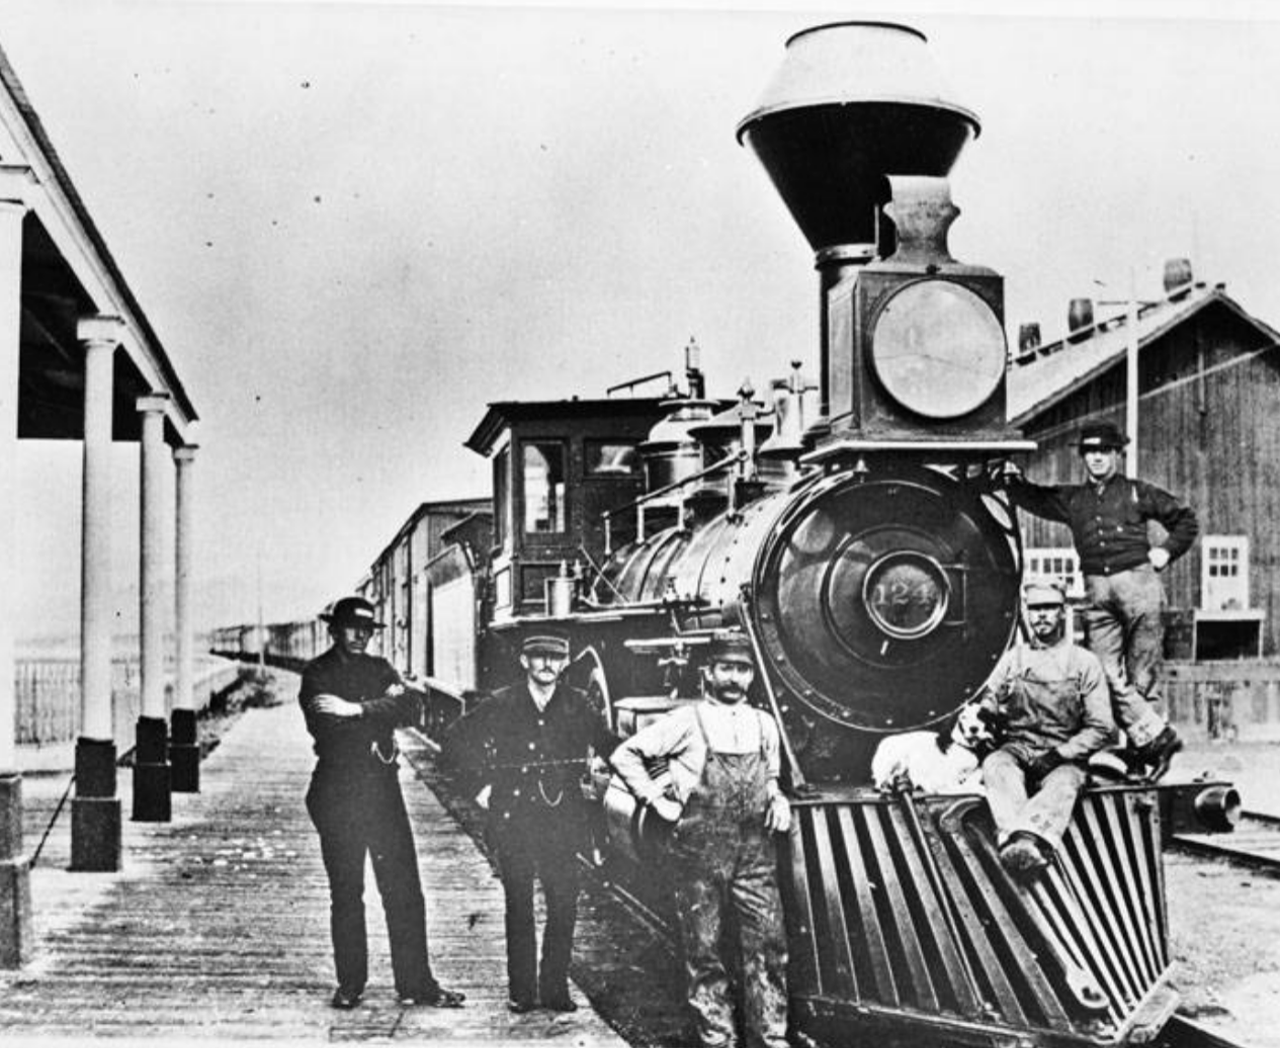 Texas’ major cities are all far apart from each other for a reason.
In the late 1800s, when Texas was really forming into what it is today, new settlements were able to be far away from existing, and larger, cities. Why? The boom of the railroad industry meant that there could be some space between different places where people lived.
Photo via UTSA Libraries Special Collections